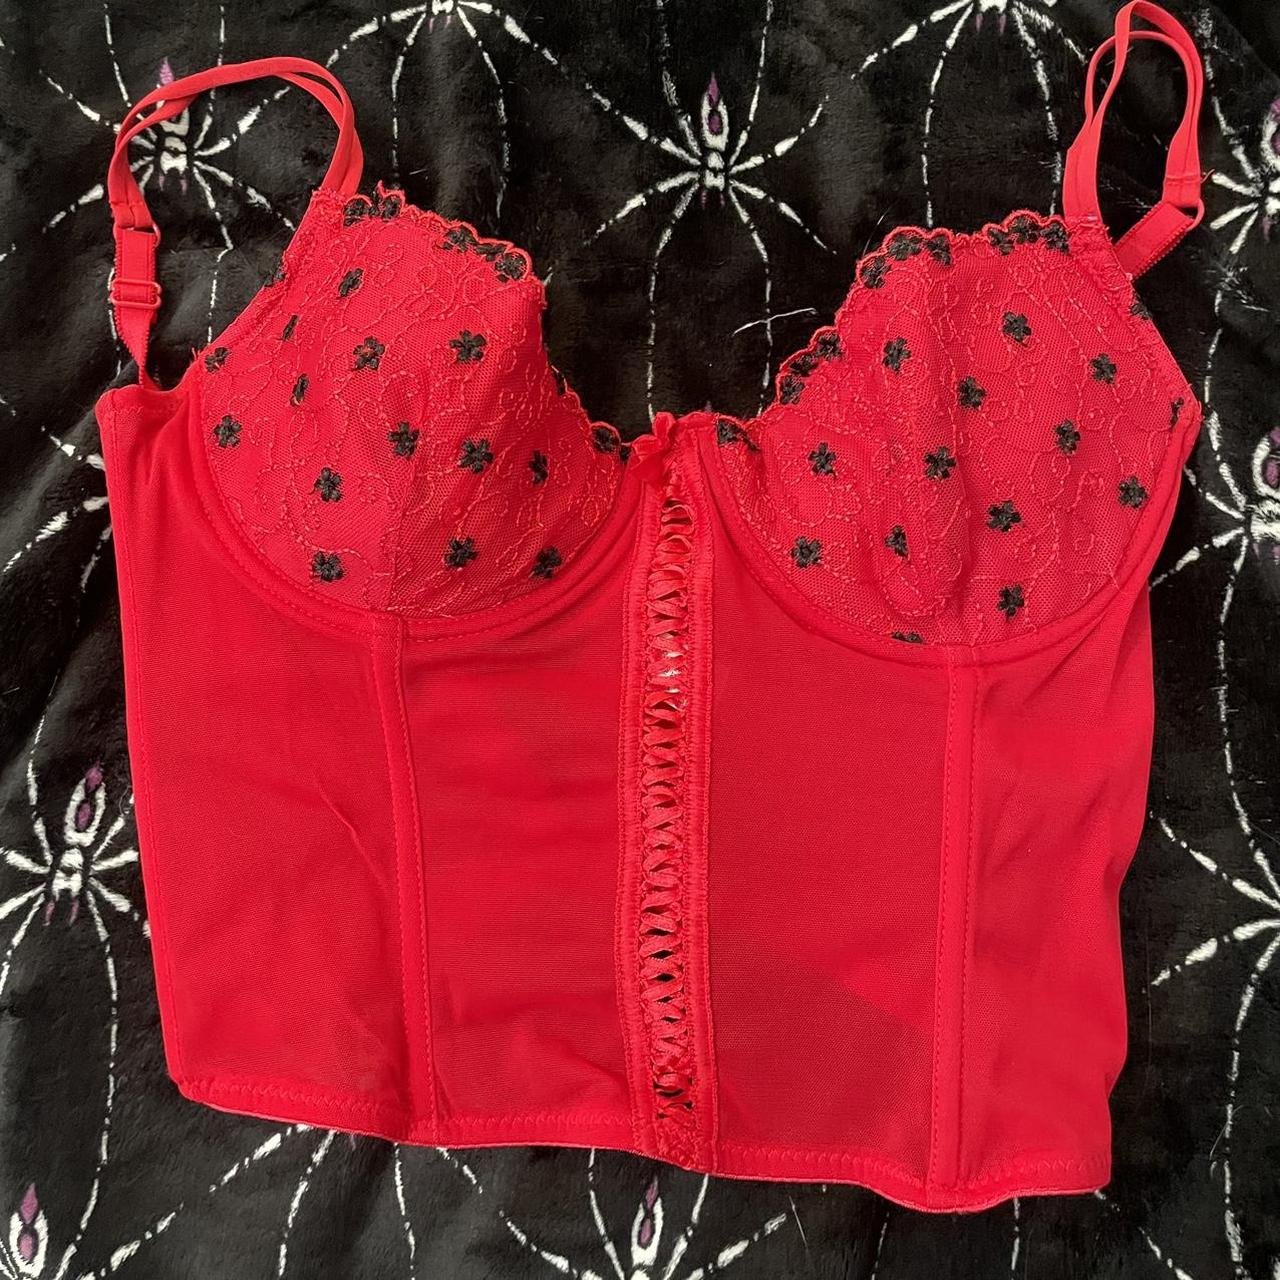 Scarlet - Embroidery Corset Bra